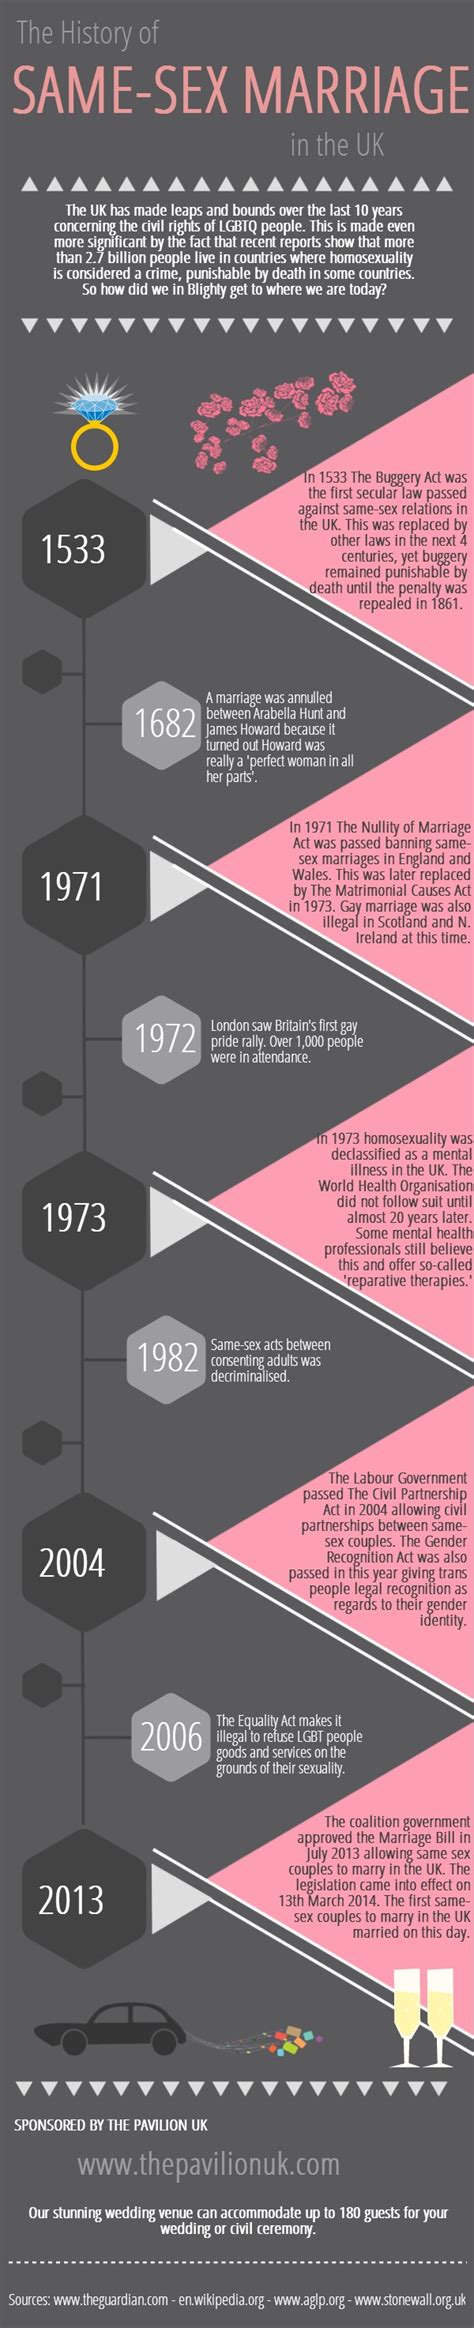 the history of same sex marriage in the uk infographic visualistan